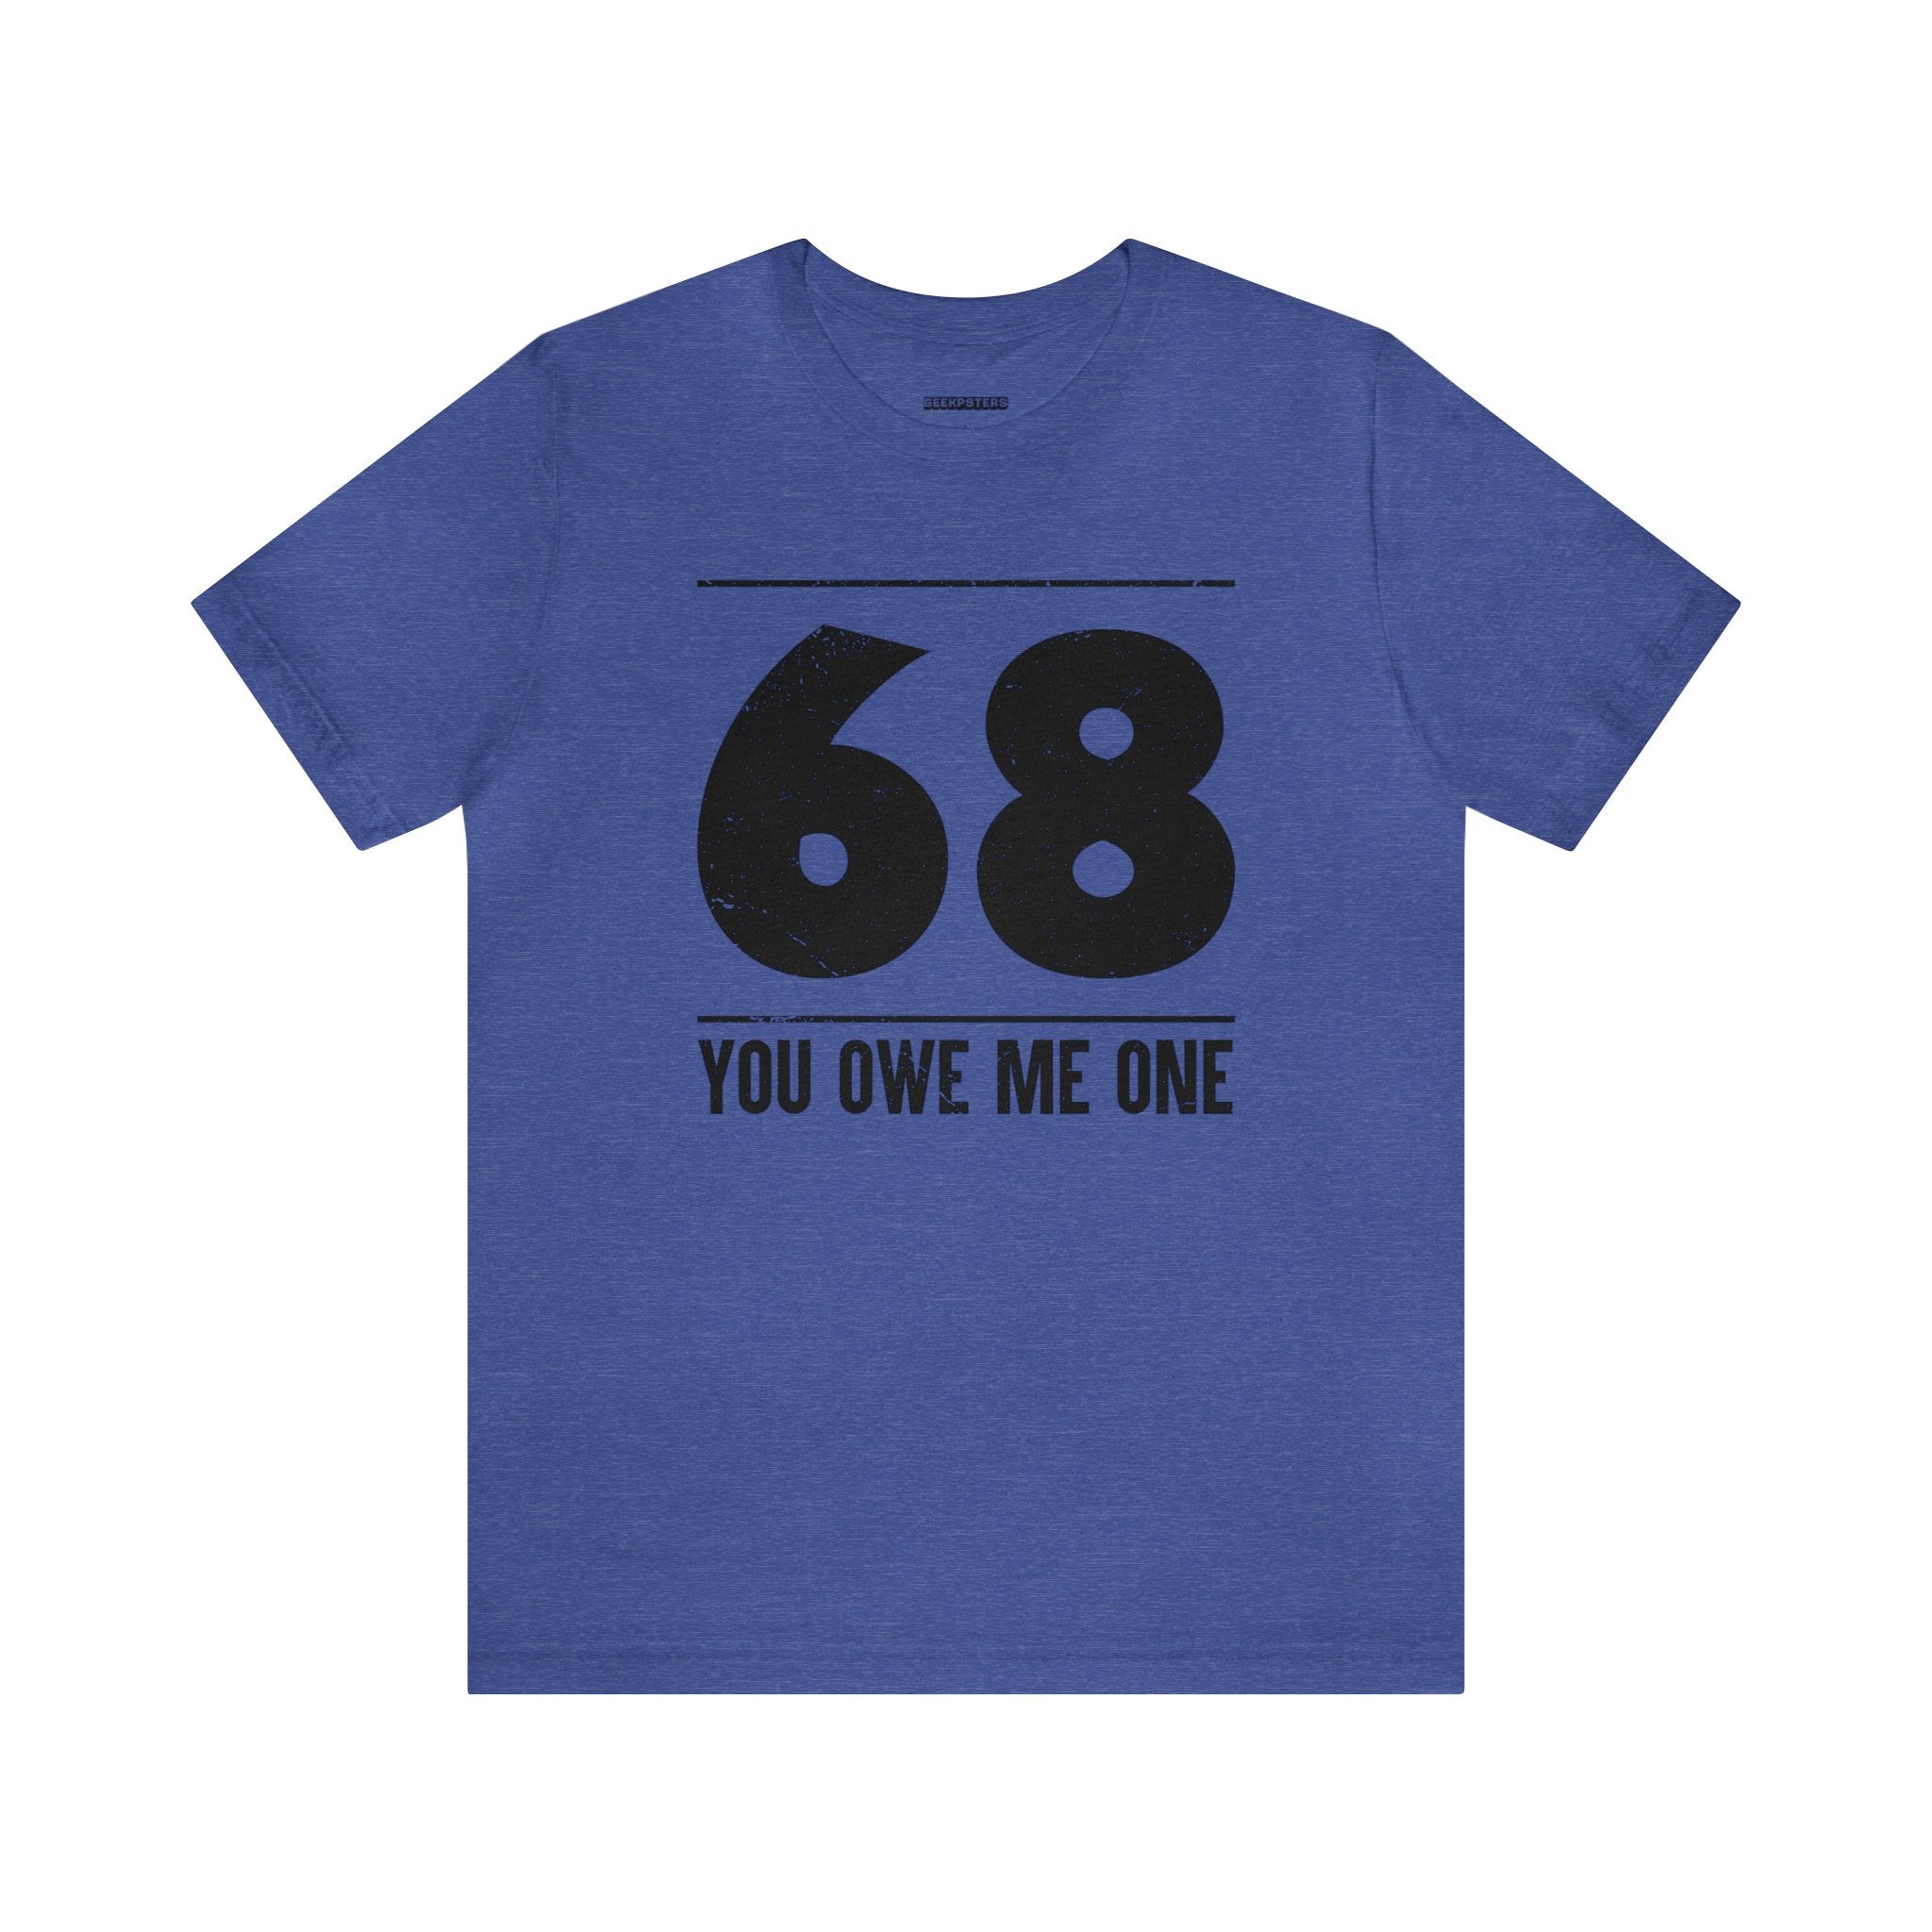 An awesome deal on a geeky t-shirt that says "68 You Owe Me One.